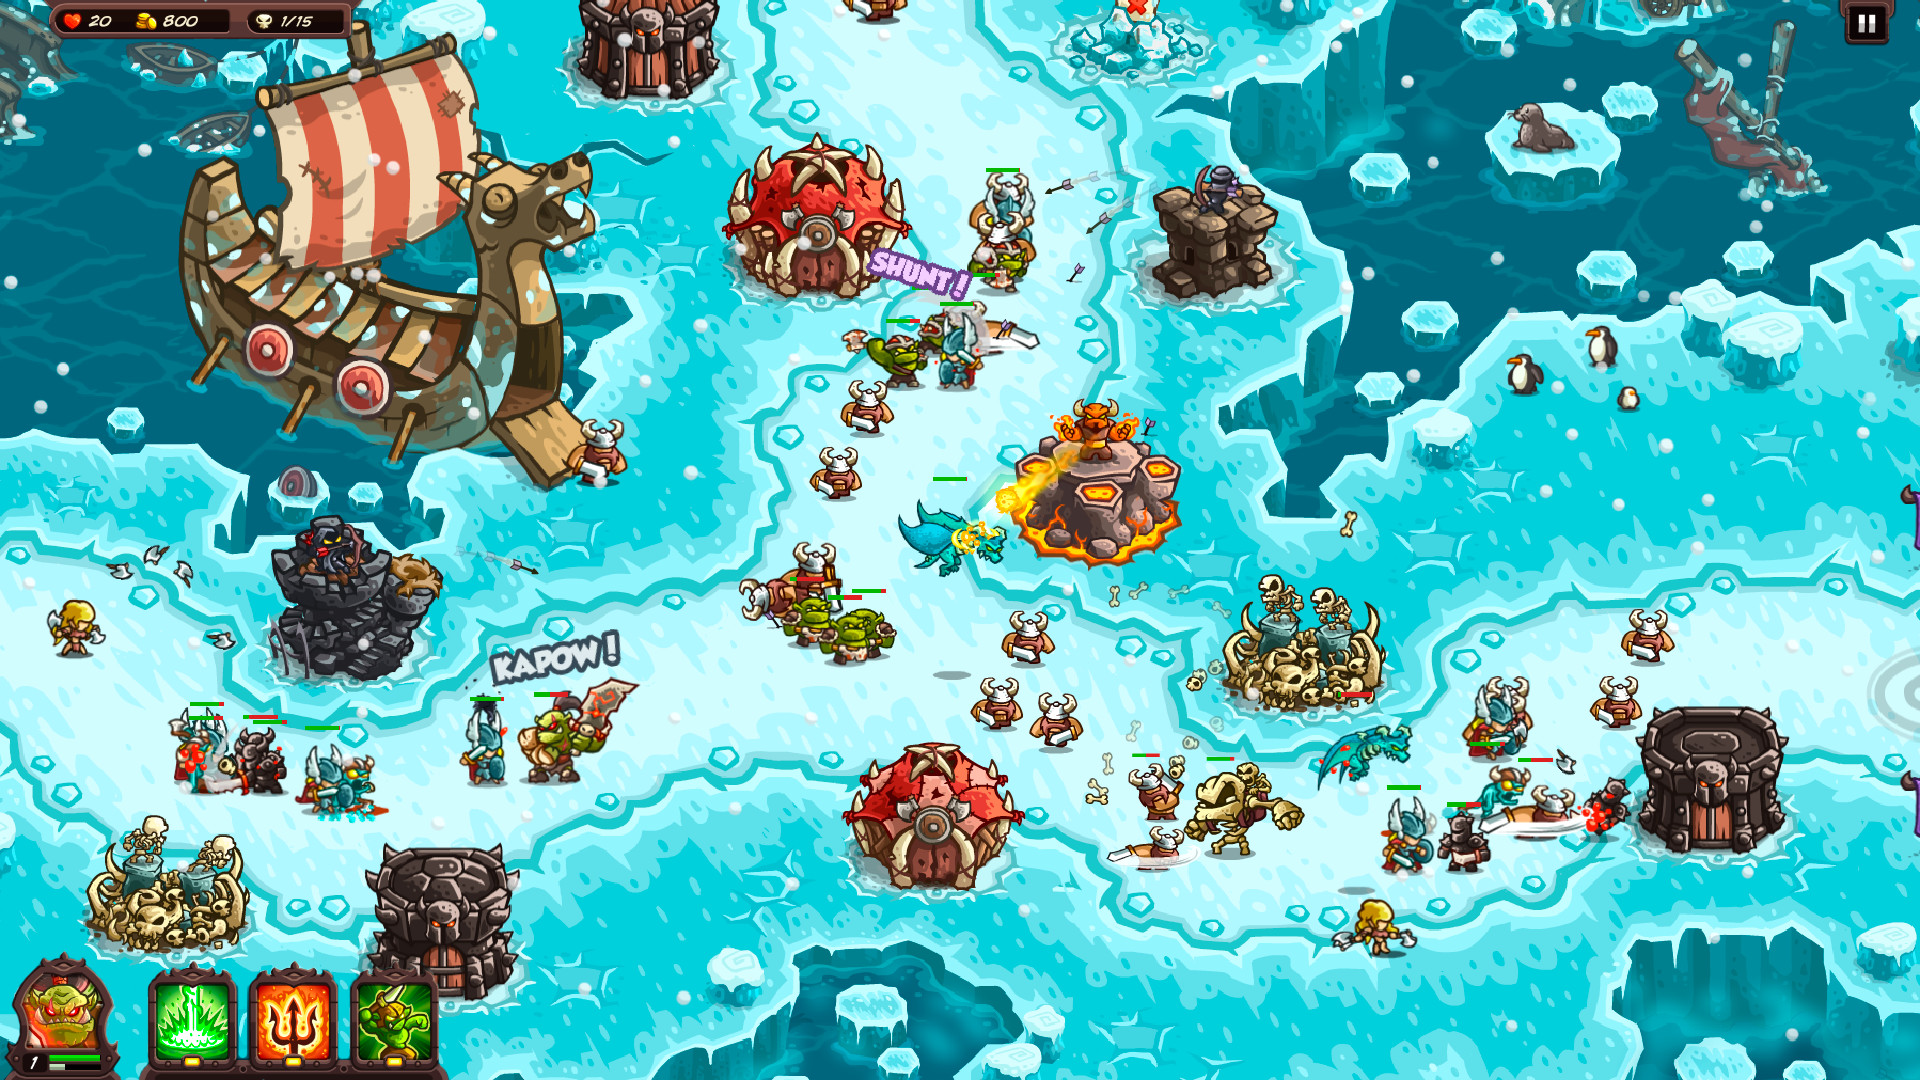 Buy Kingdom Rush Android Mobile Games